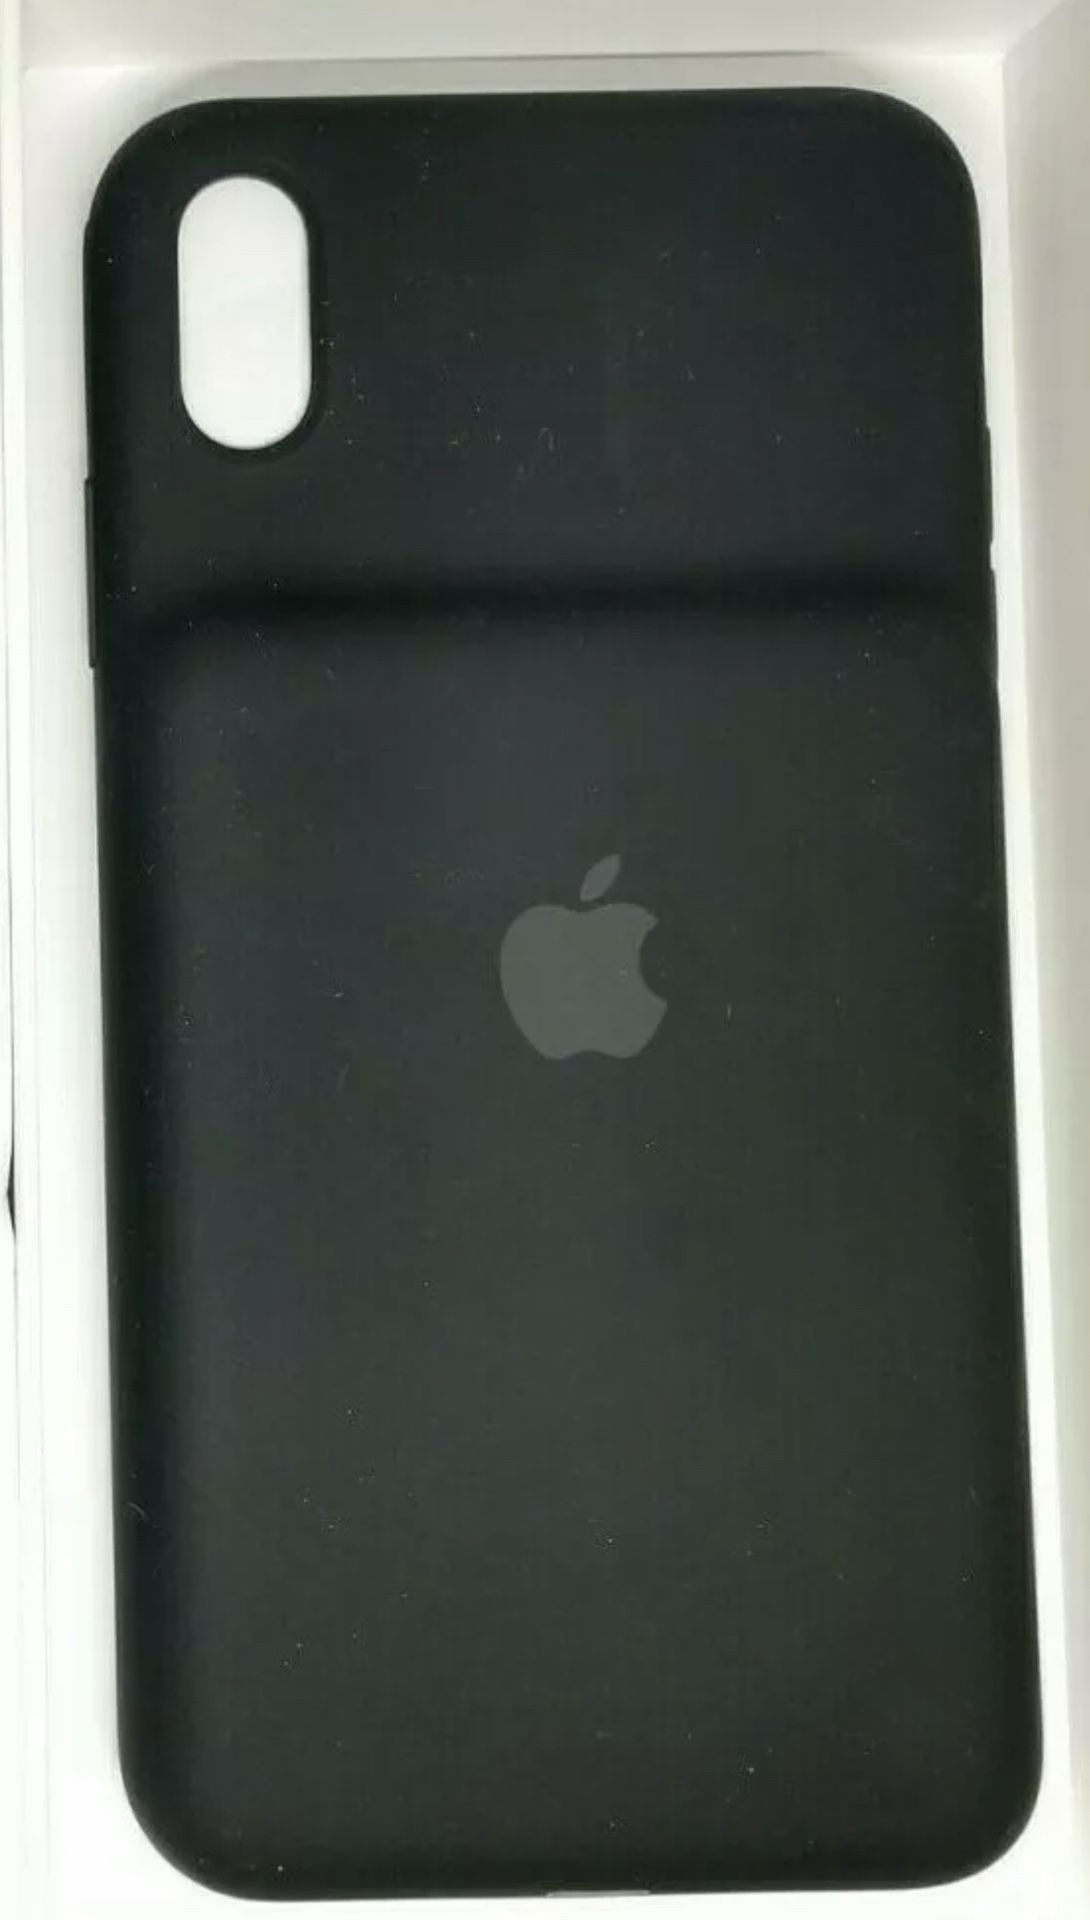 Oem iPhone XS Max smart battery case